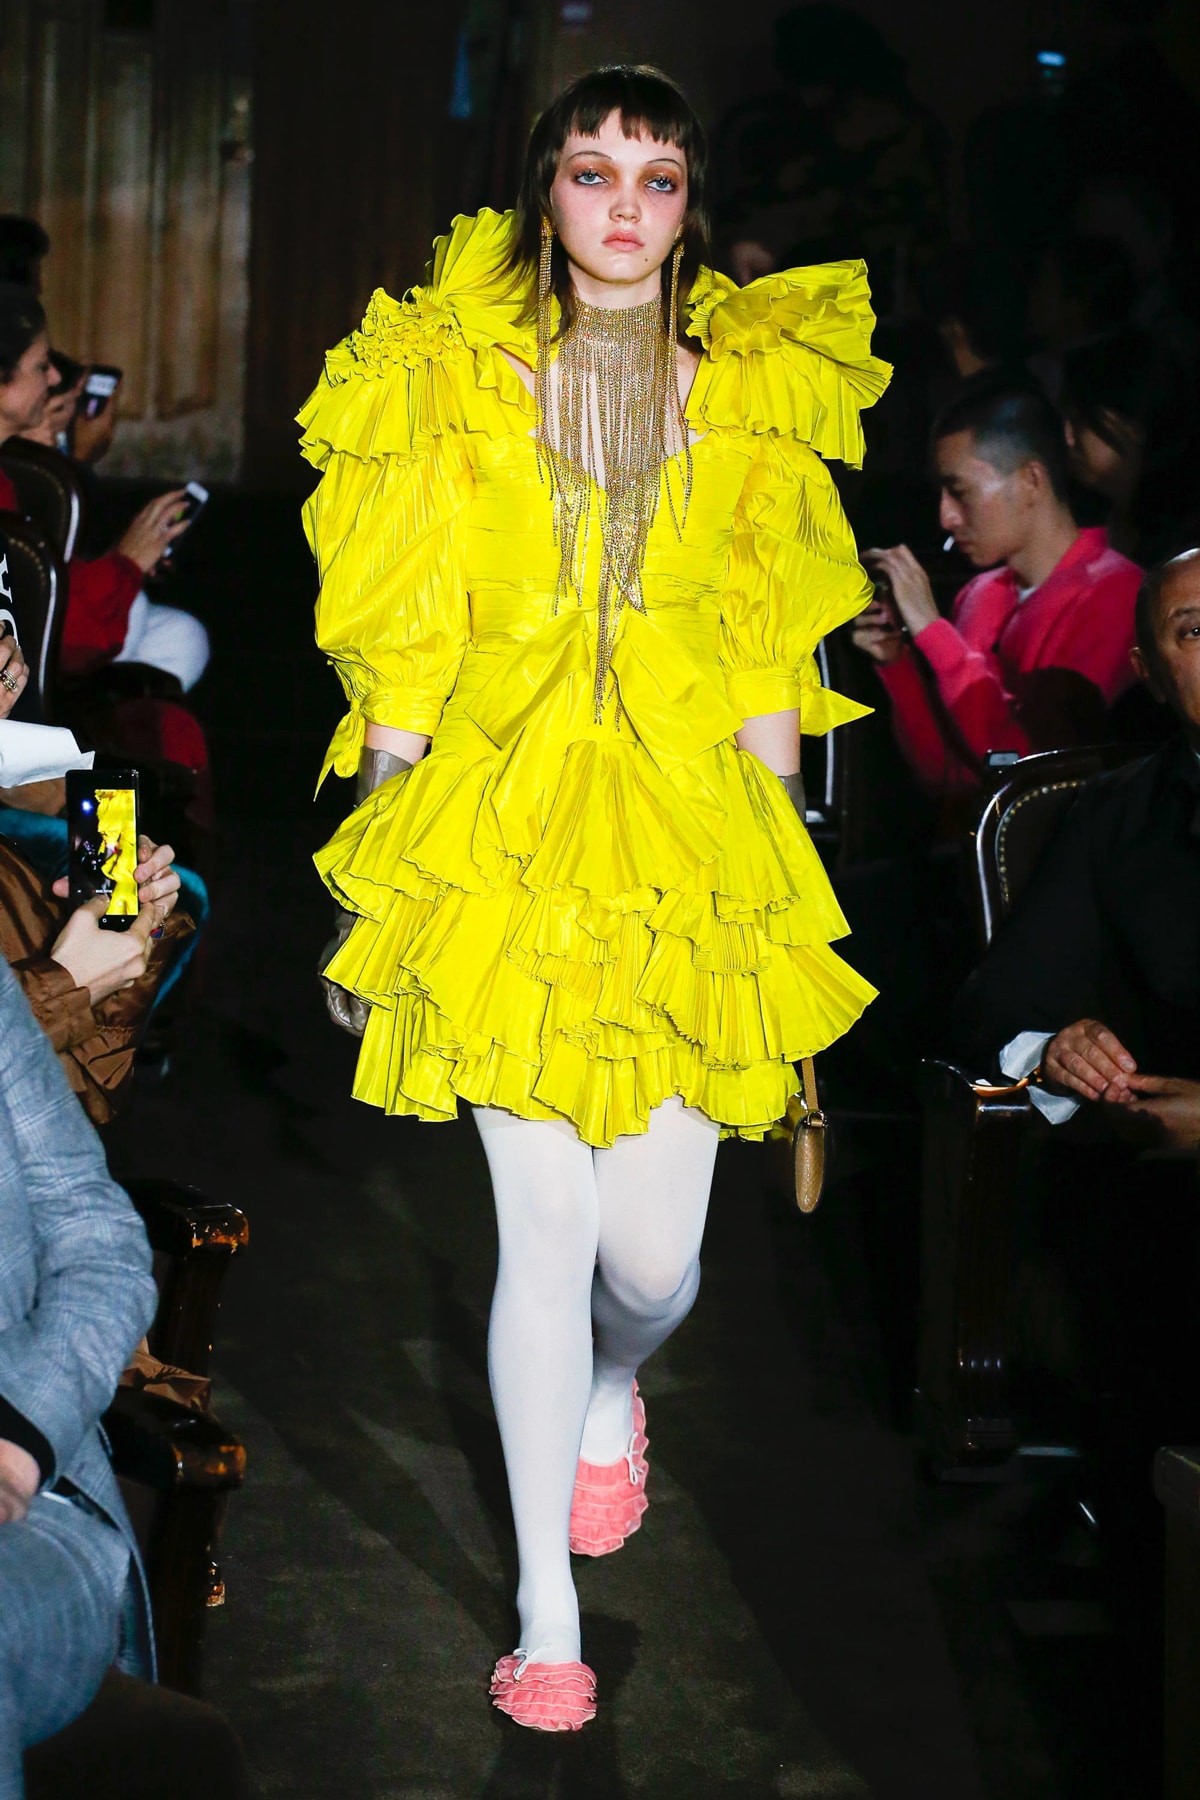 Gucci Alessandro Michelle Spring Summer 2019 Paris Fashion Week Show Collection Dress Yellow Tights White